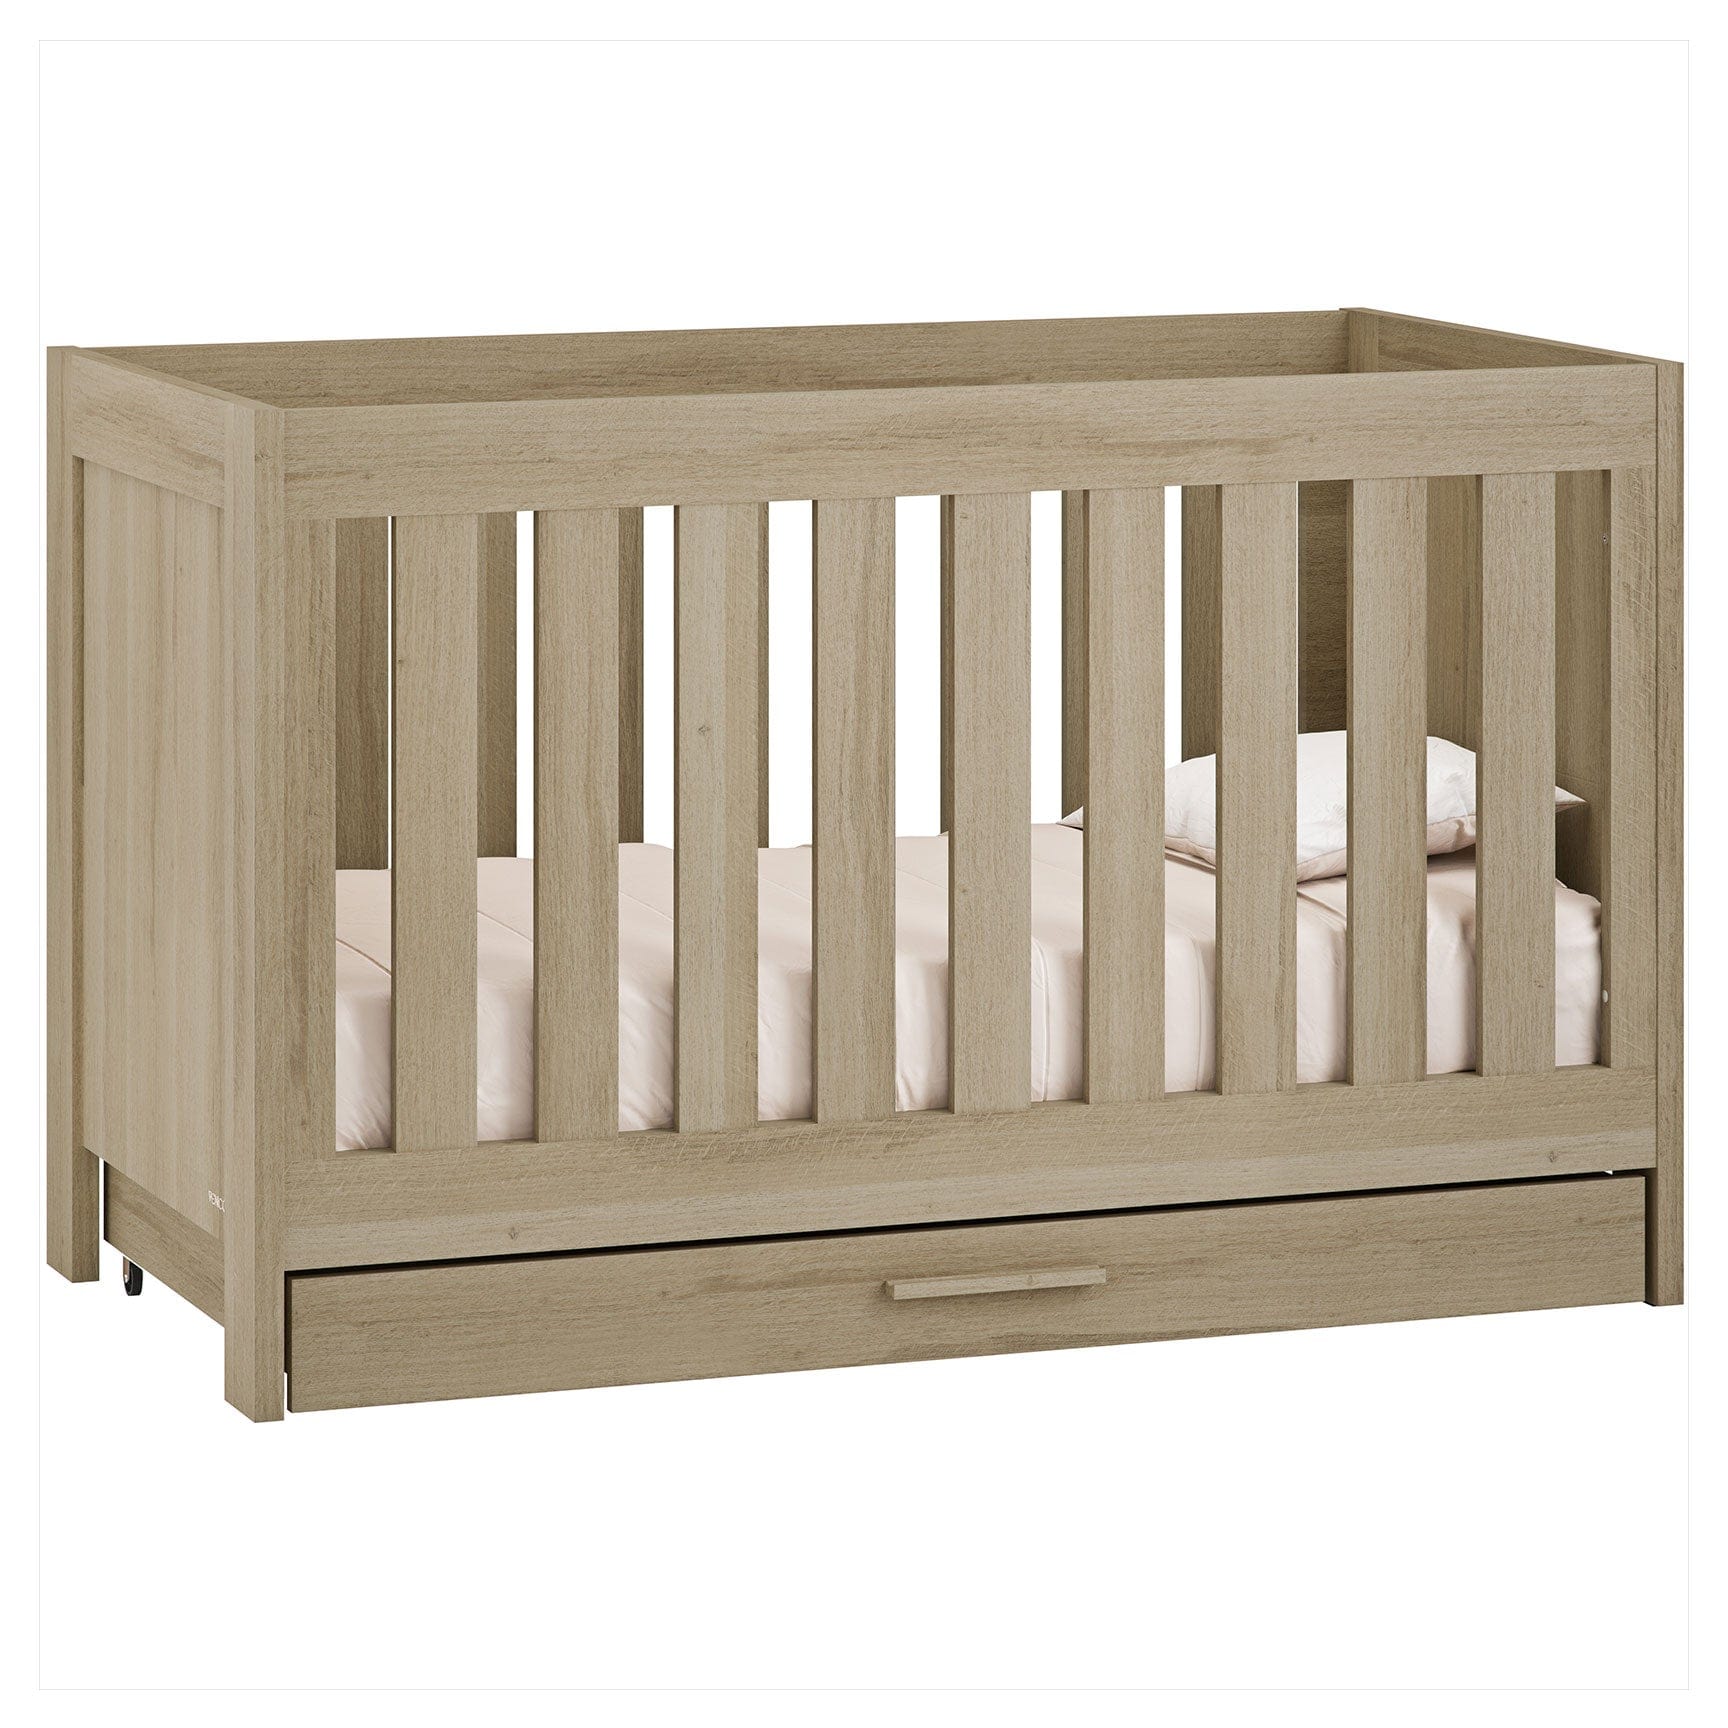 Venicci Forenzo Cot Bed with Drawer in Honey Oak Cot Beds